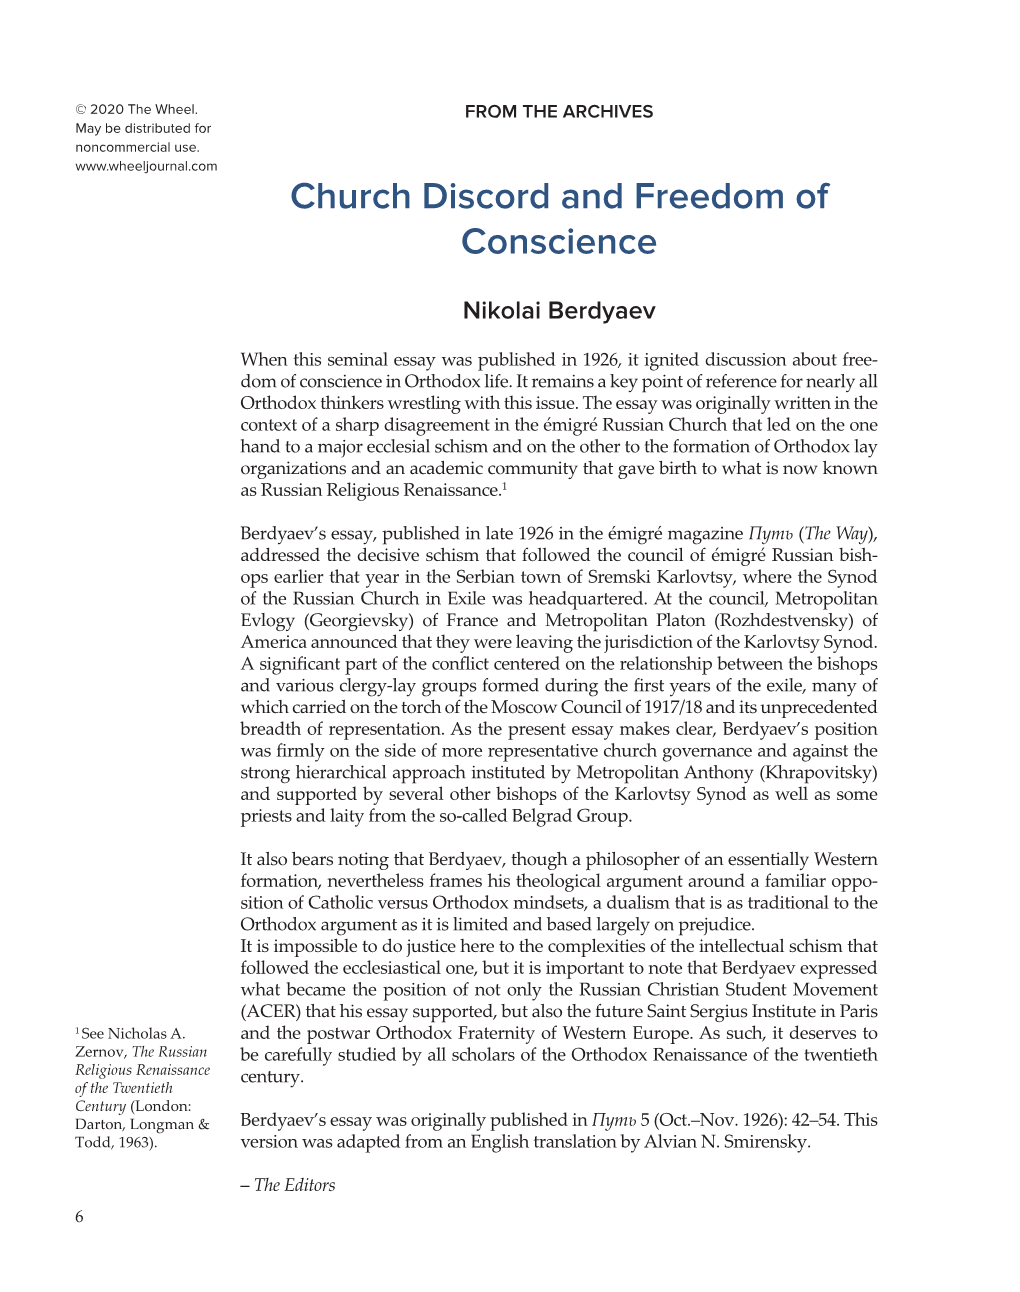 Church Discord and Freedom of Conscience